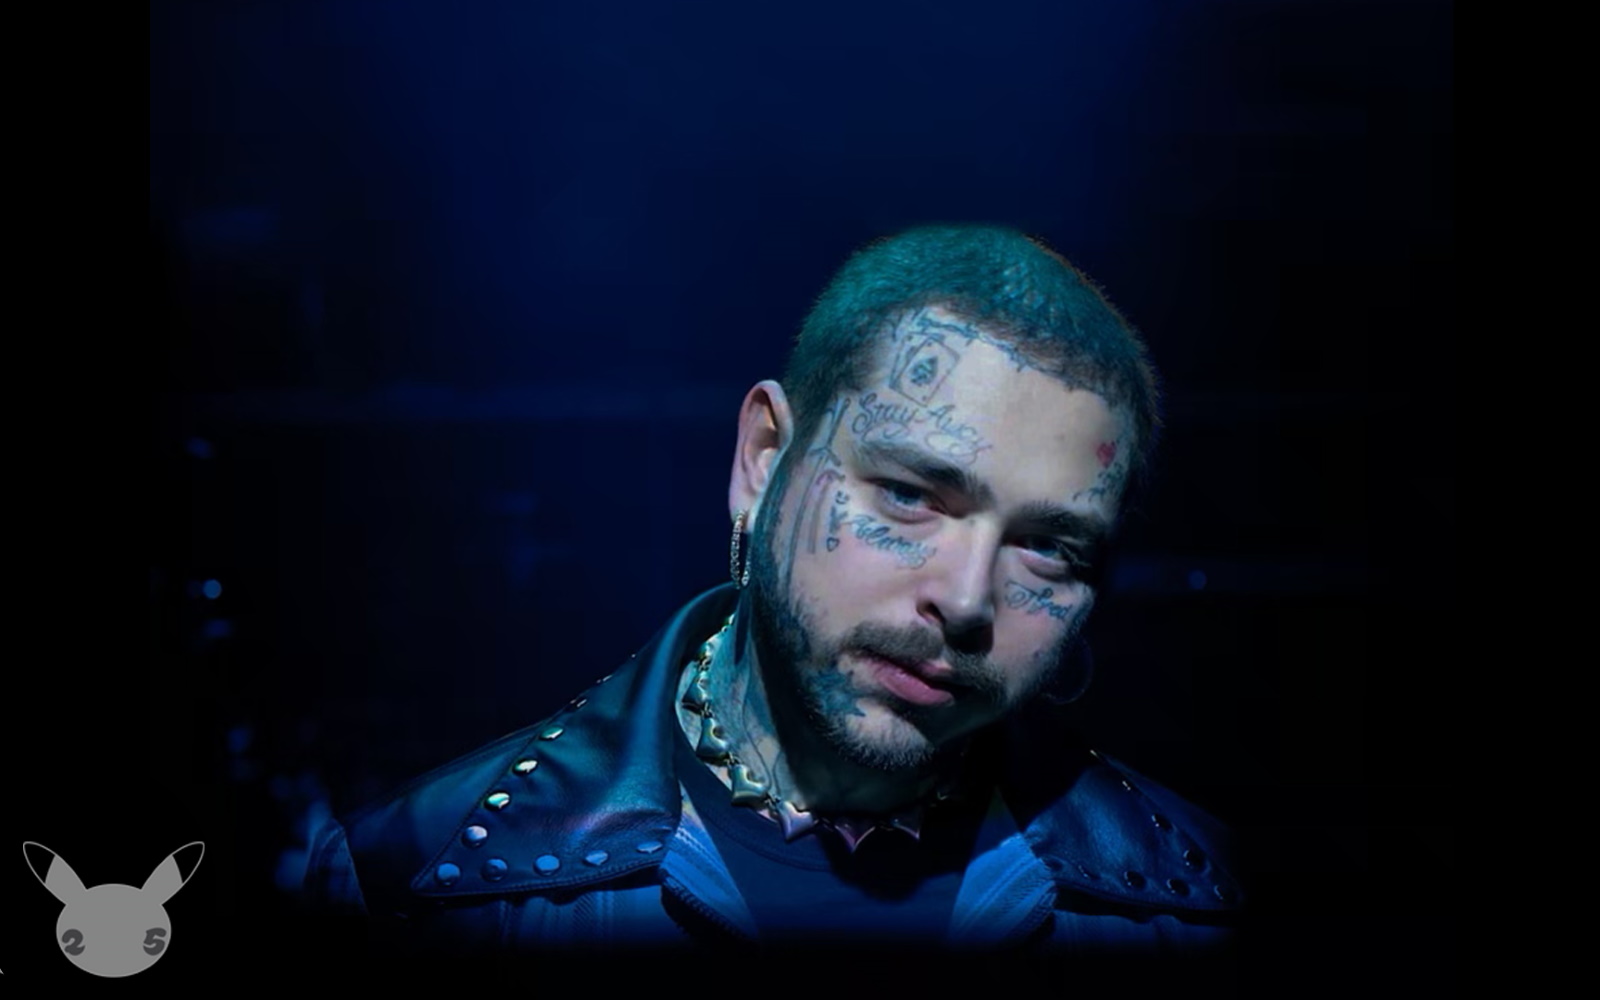 Post Malone To Play Virtual Concert For Pokémon 25th Anniversary